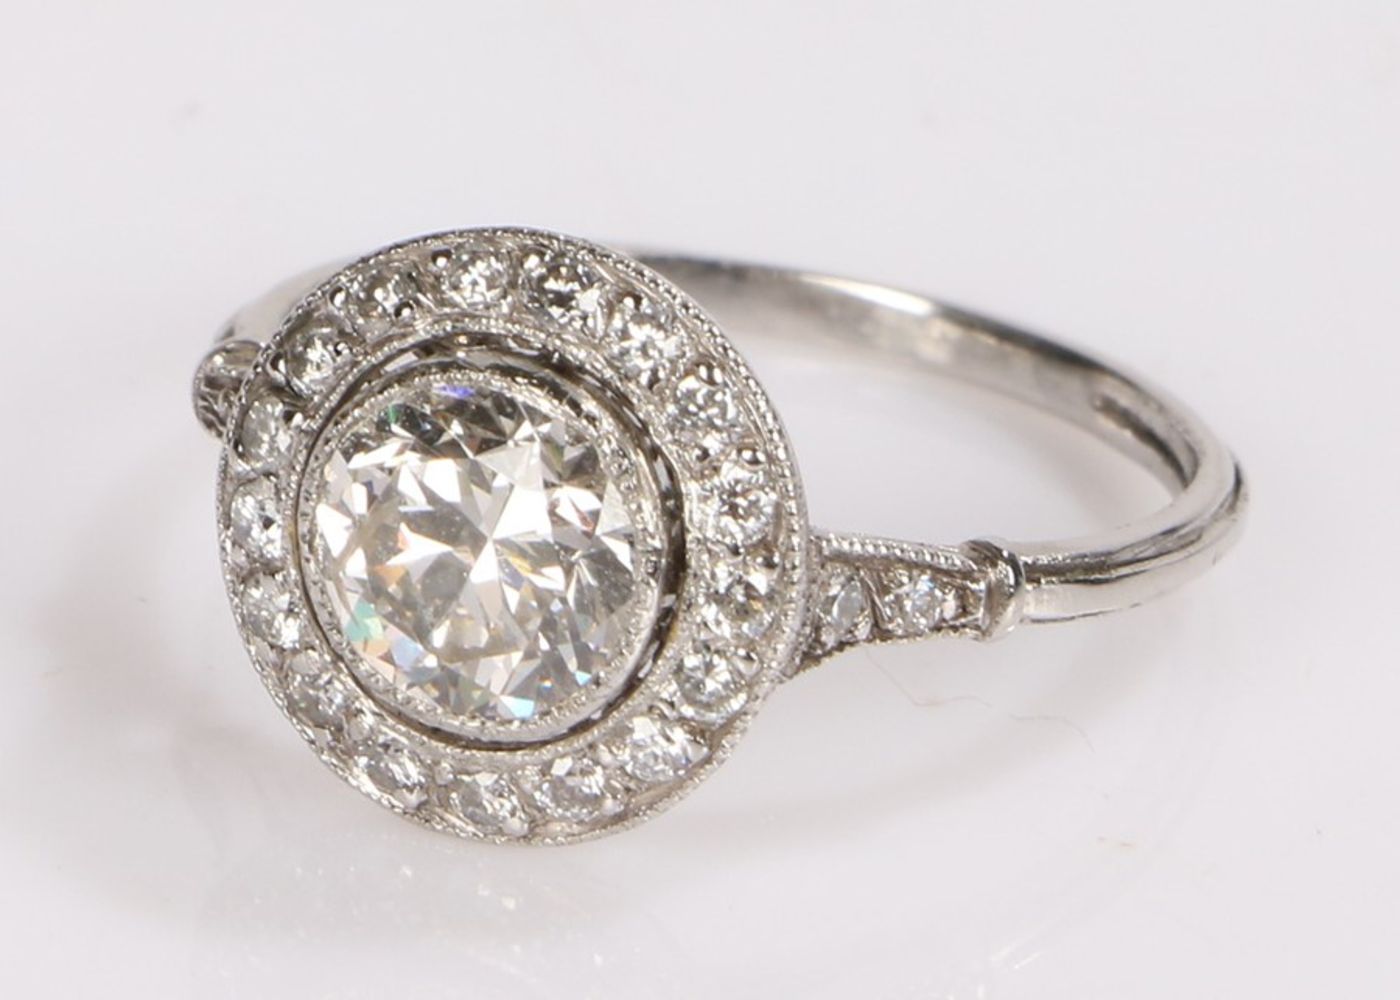 New Year Jewellery Auction - January 10th 2021